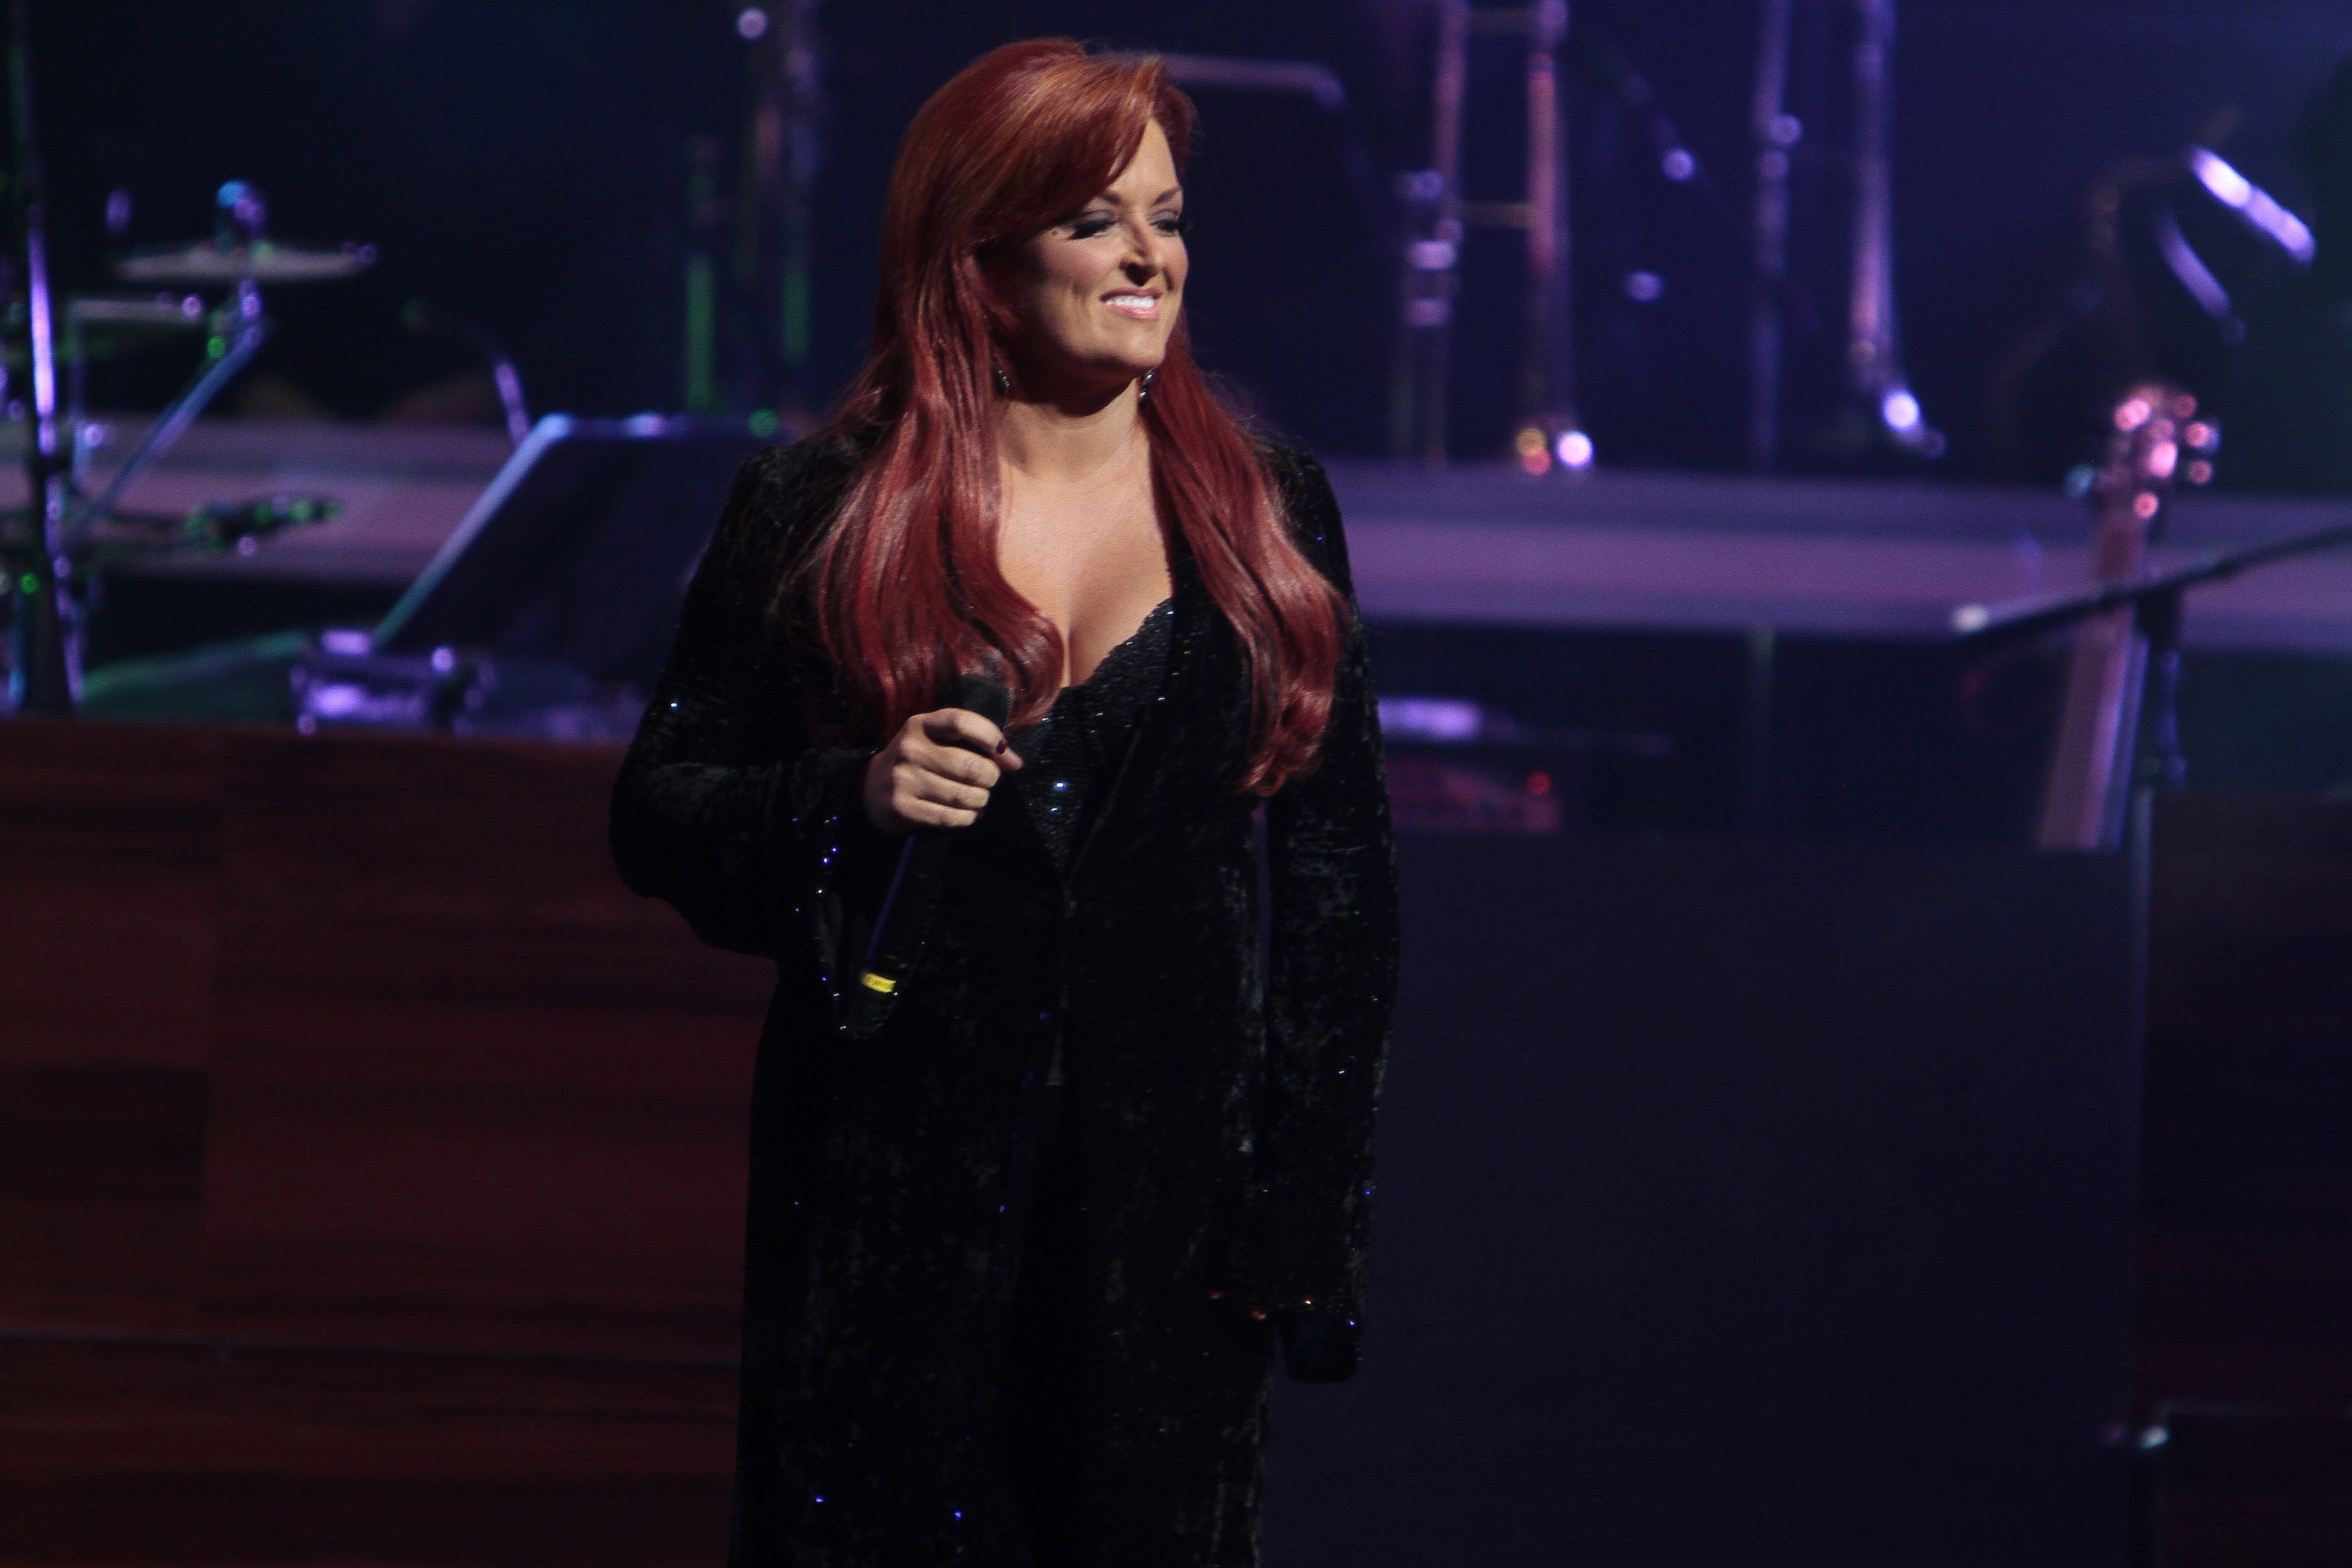 Wynonna Judd performs at Kenny Rogers: The First 50 Years on April 10, 2010, in Ledyard, Connecticut. | Source: Rahav Segev/WireImage/Getty Images